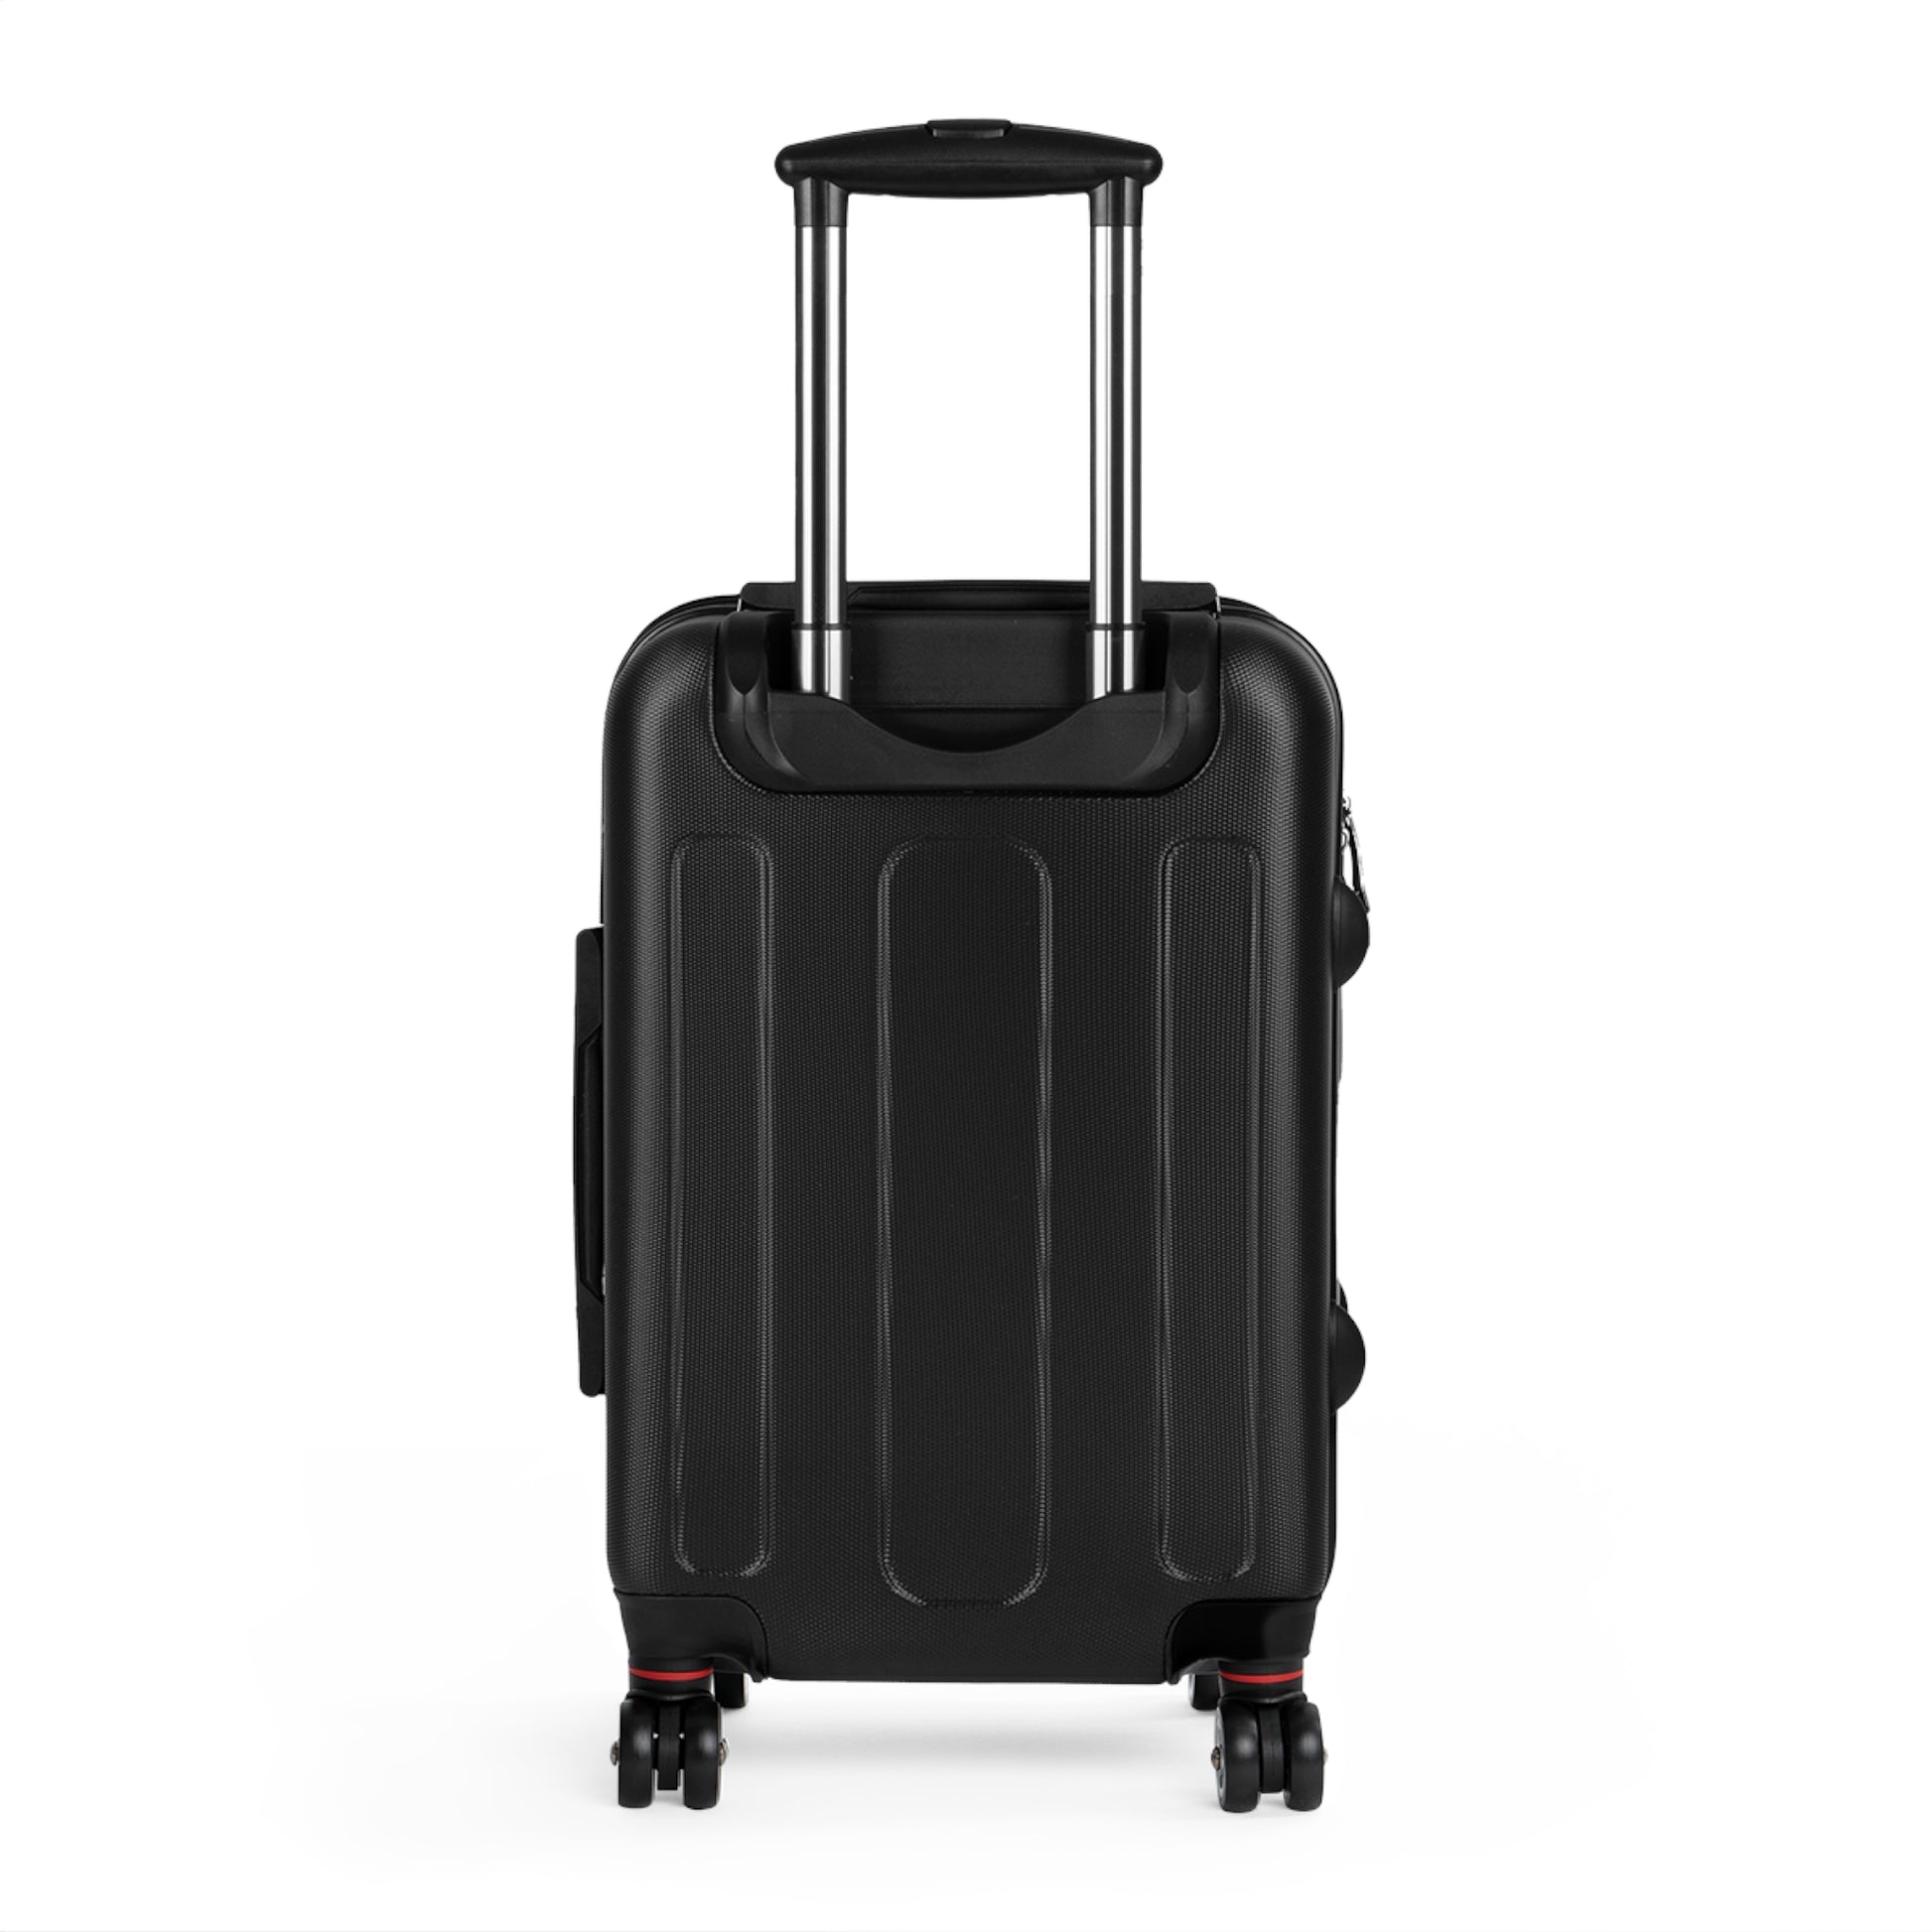 Backside of suitcase black with telescoping handle